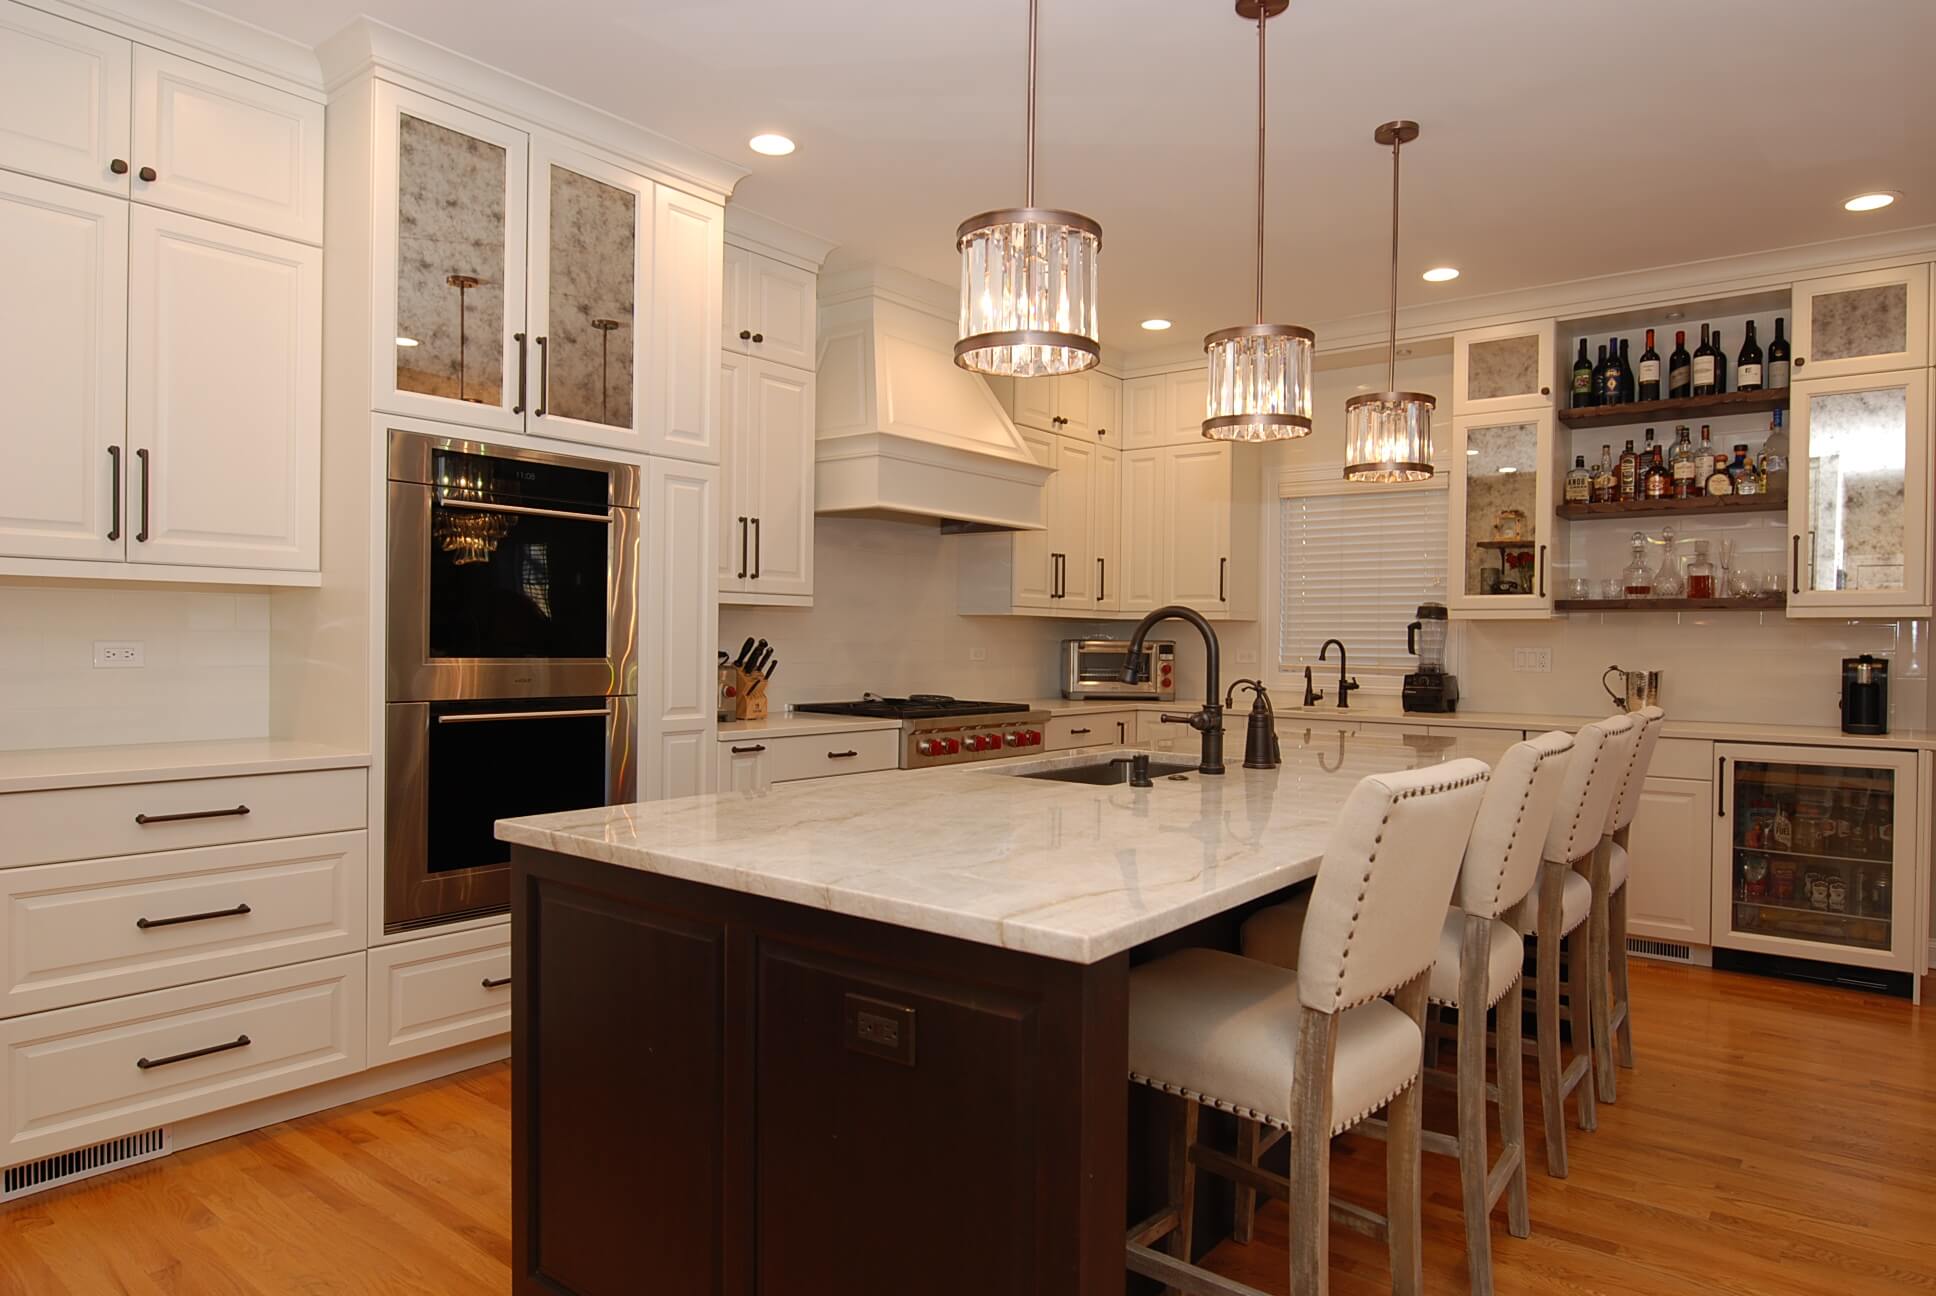 Transitional Kitchen Remodel In Chicago ?width=3872&name=Transitional Kitchen Remodel In Chicago 